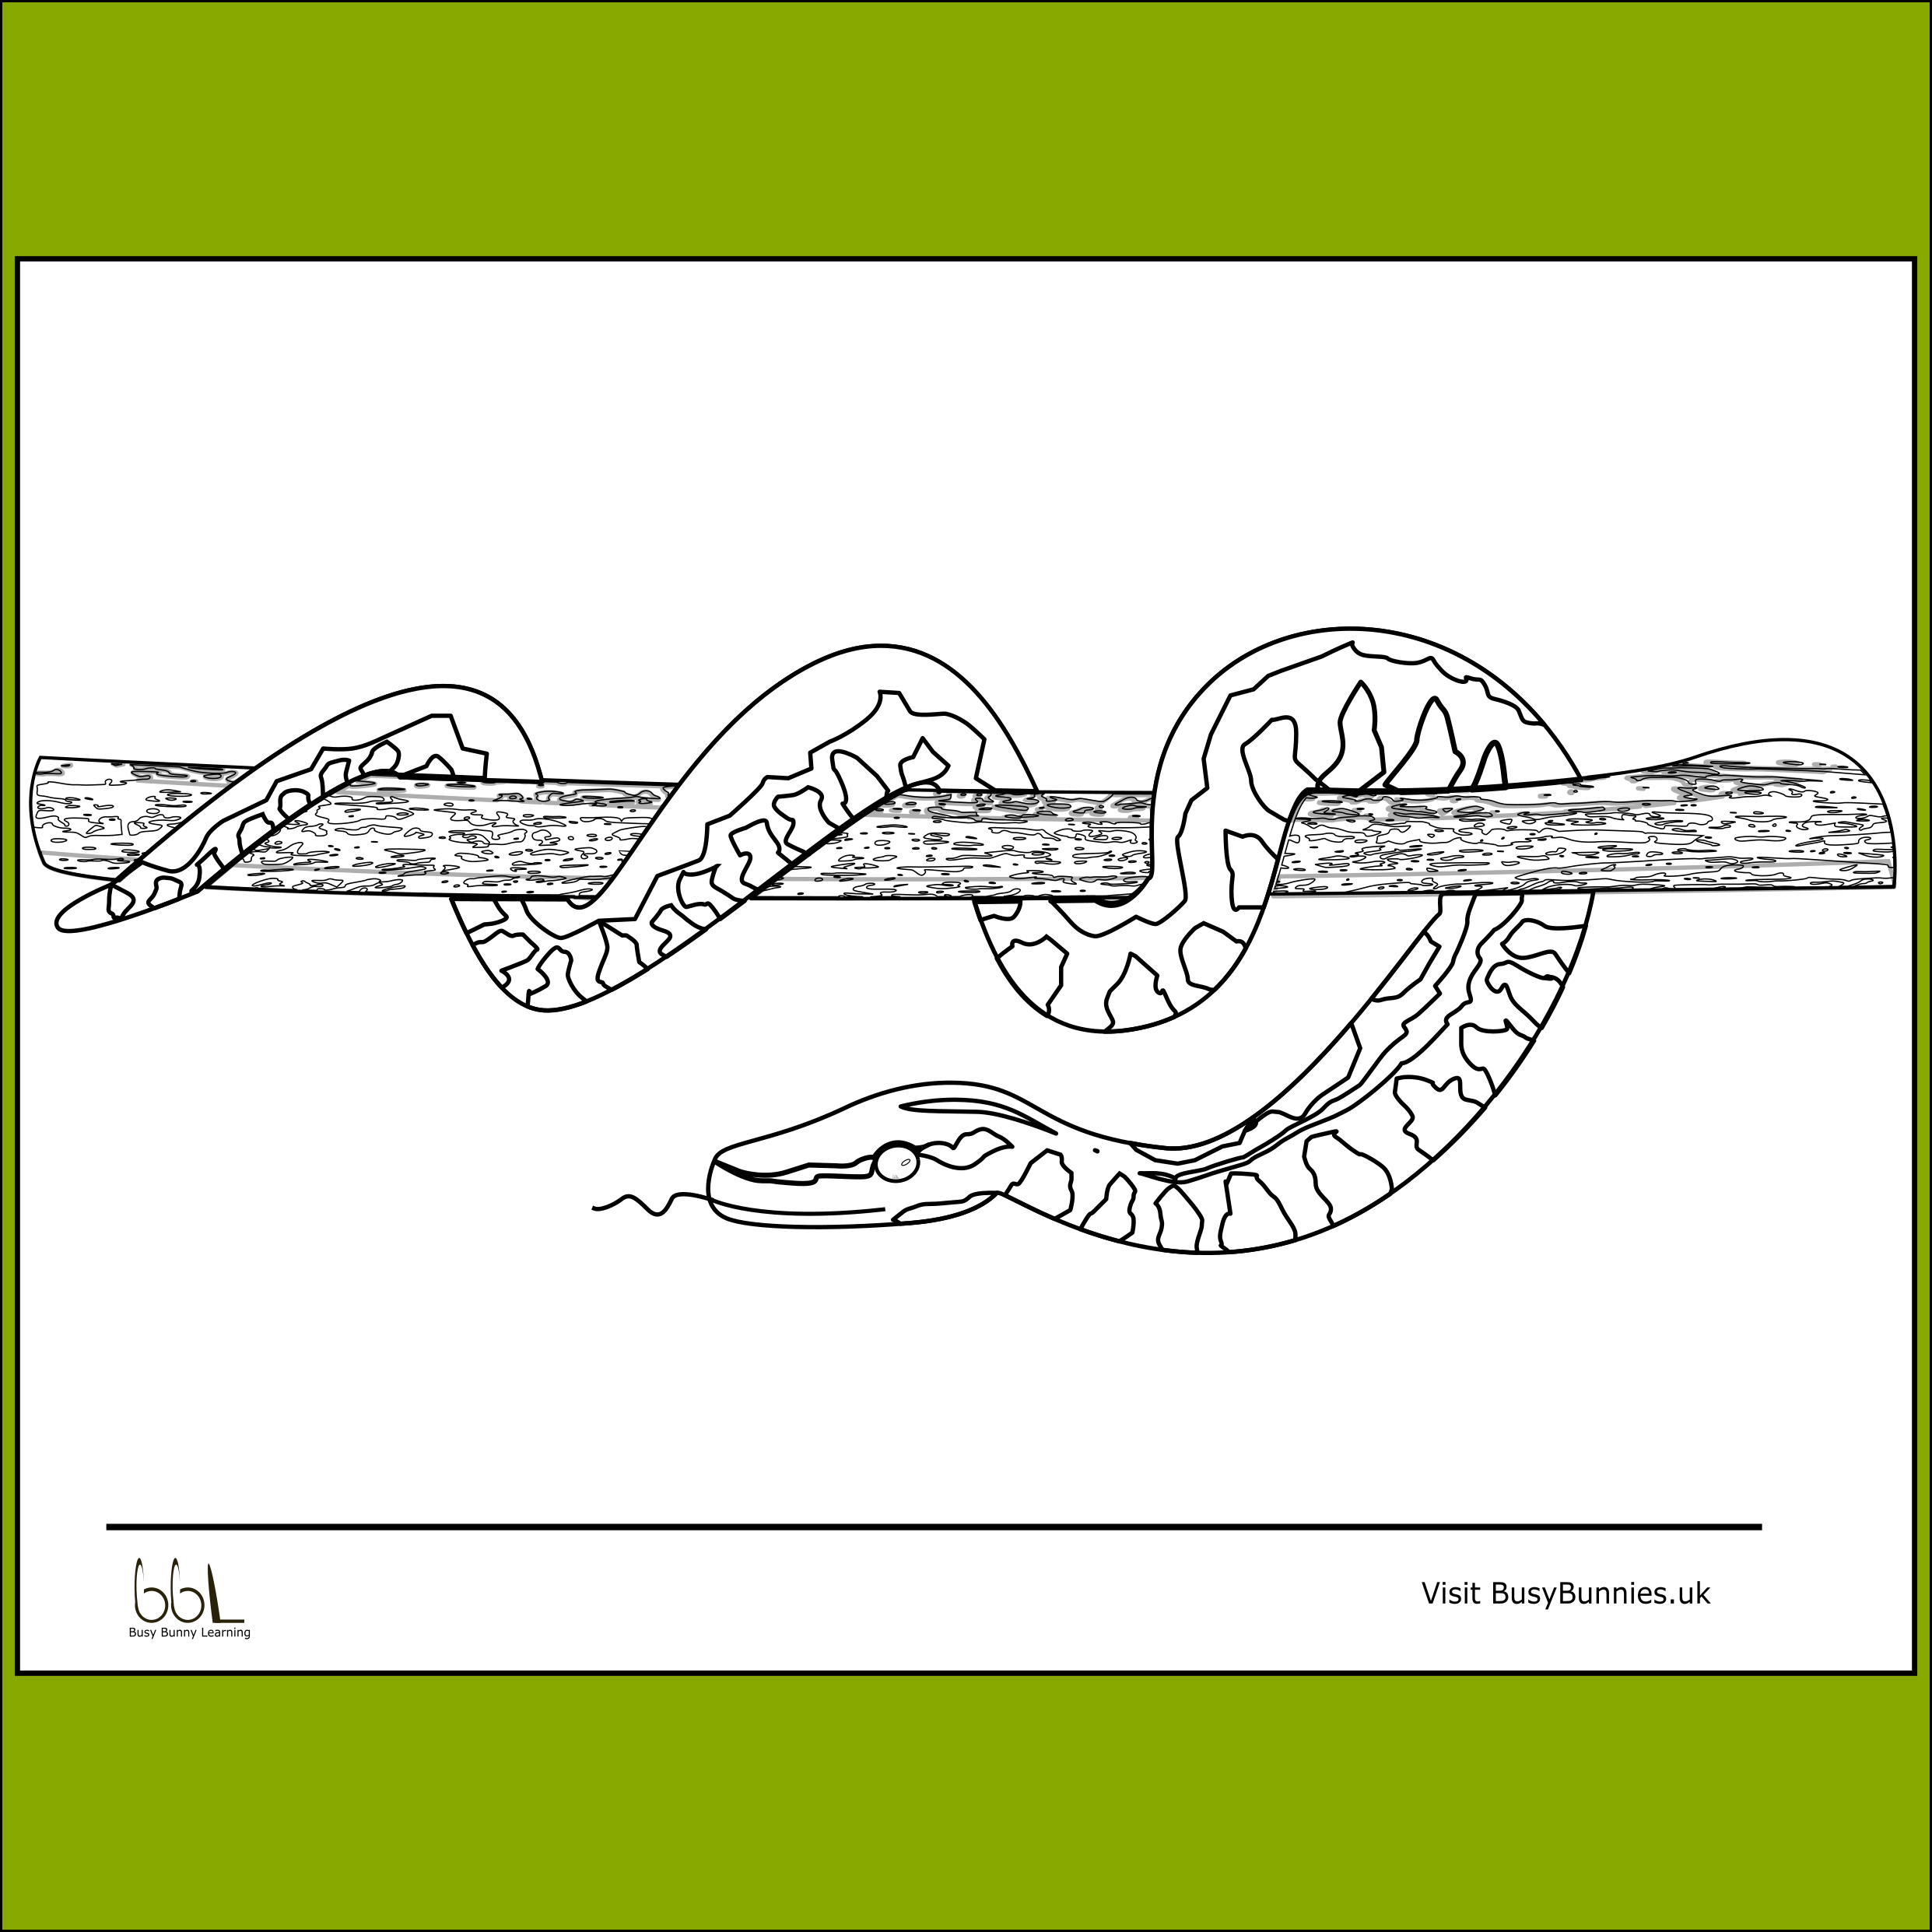 boa constrictor snake coloring page